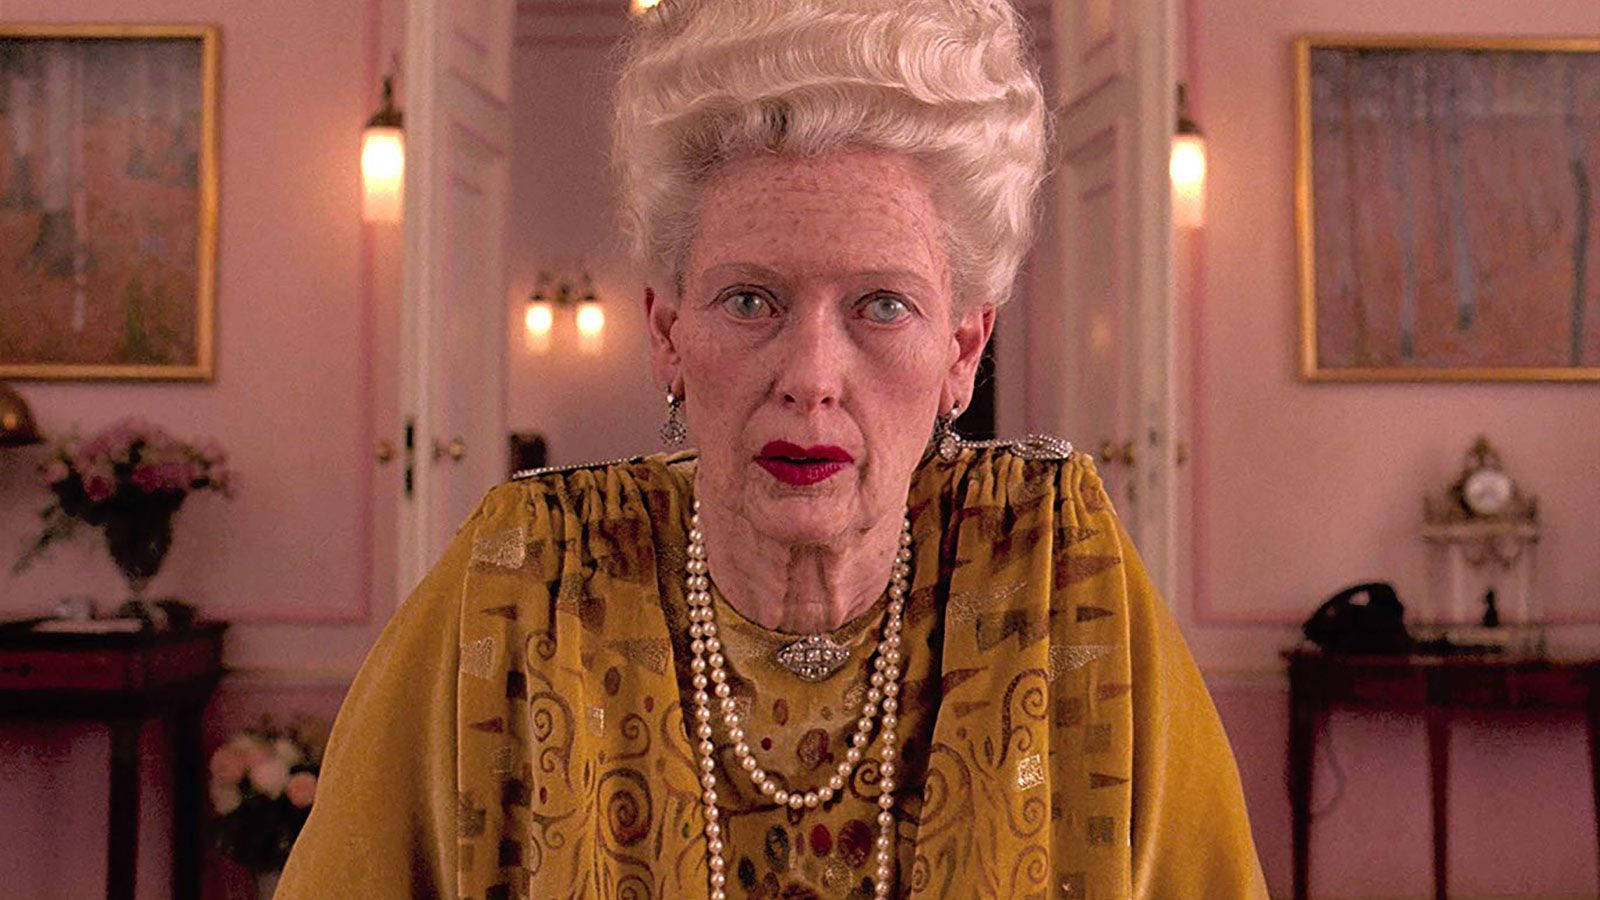 Award-winning actress Tilda Swinton in prominent attire as Madame D. from the movie Grand Budapest Hotel. Wallpaper